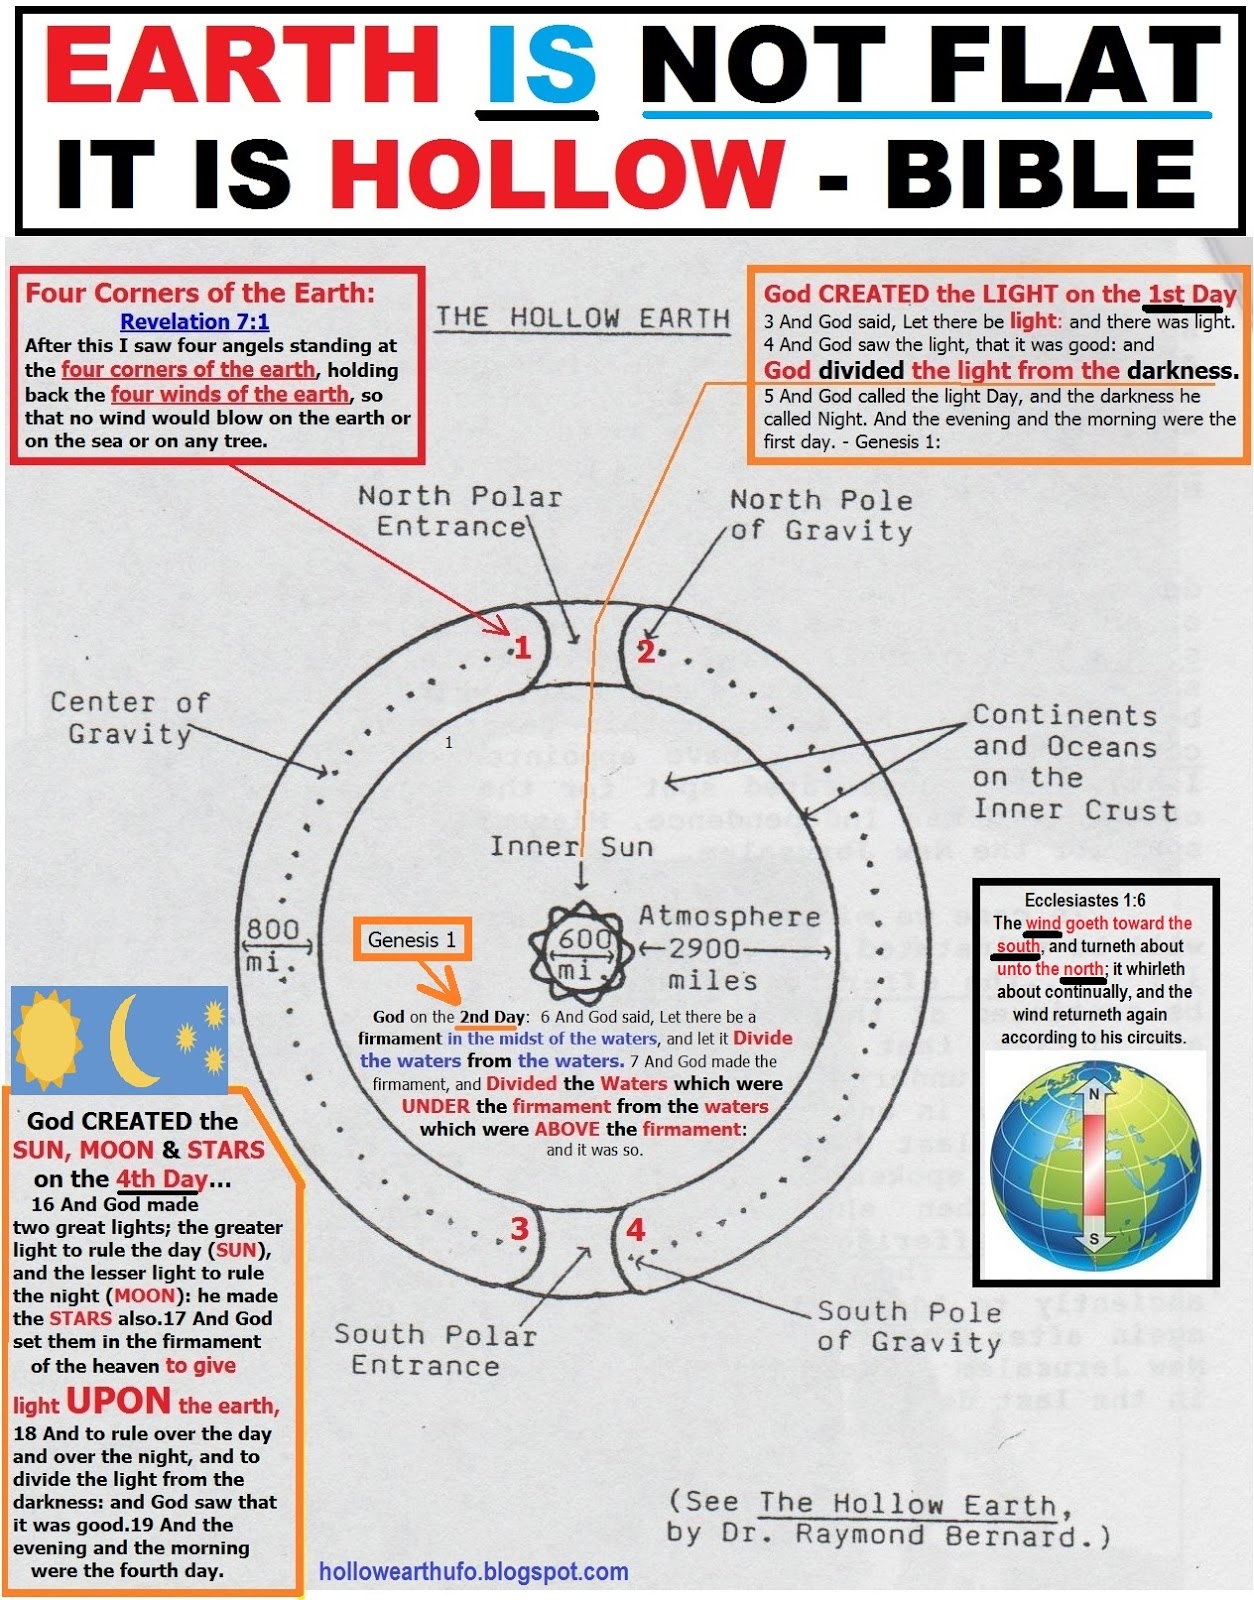 THE+EARTH+IS+NOT+FLAT+IT+IS+HOLLOW+BIBLE